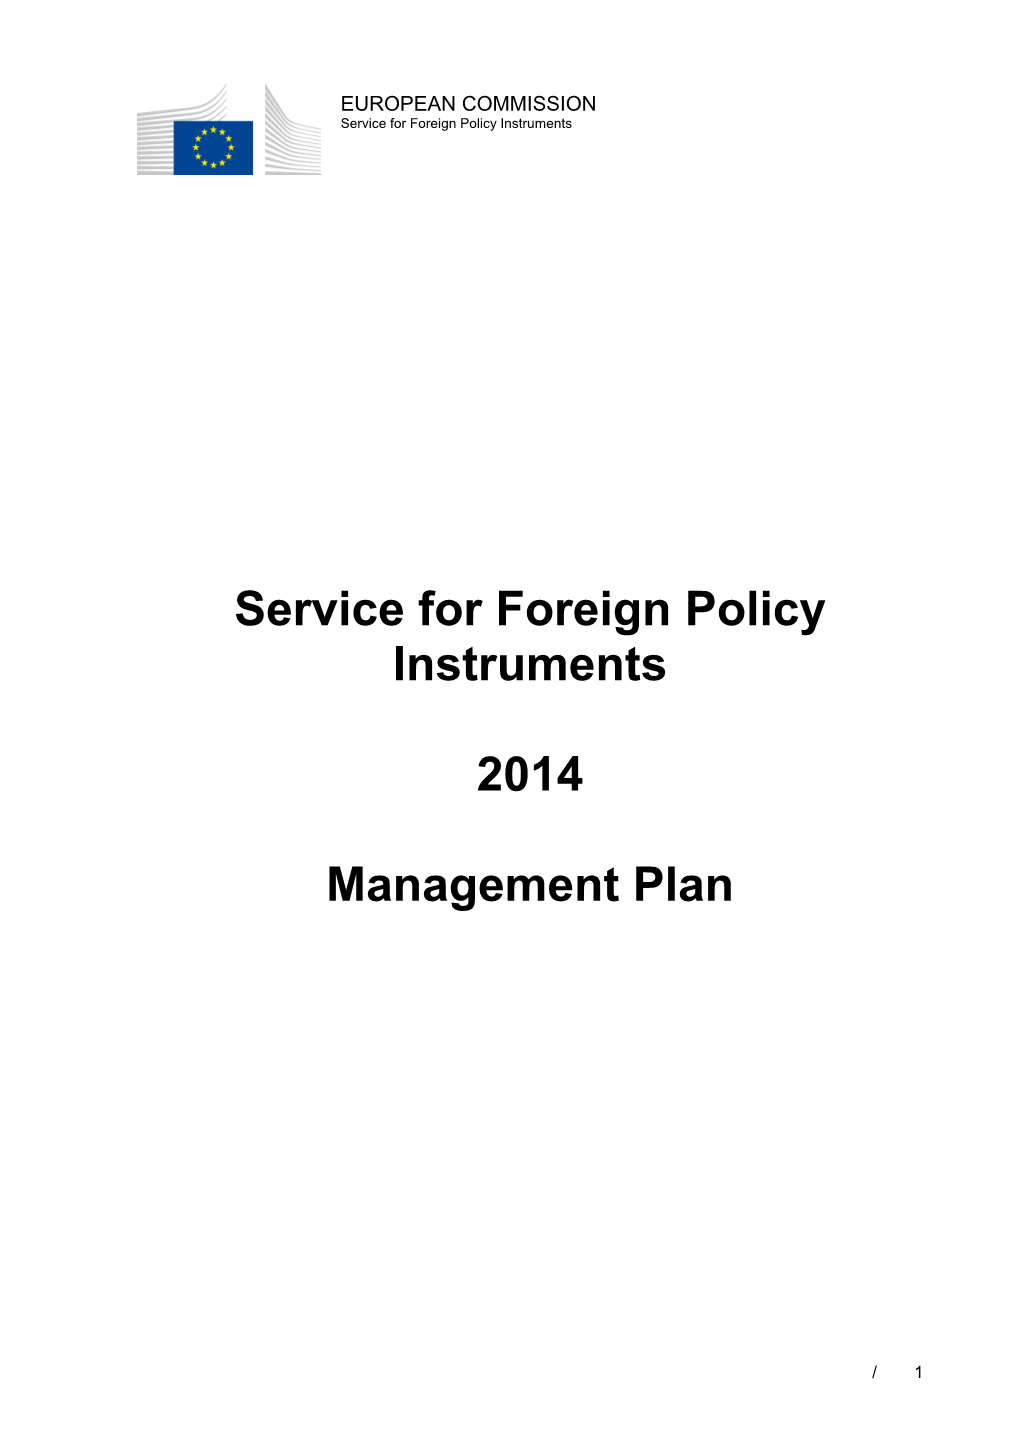 Service for Foreign Policy Instruments